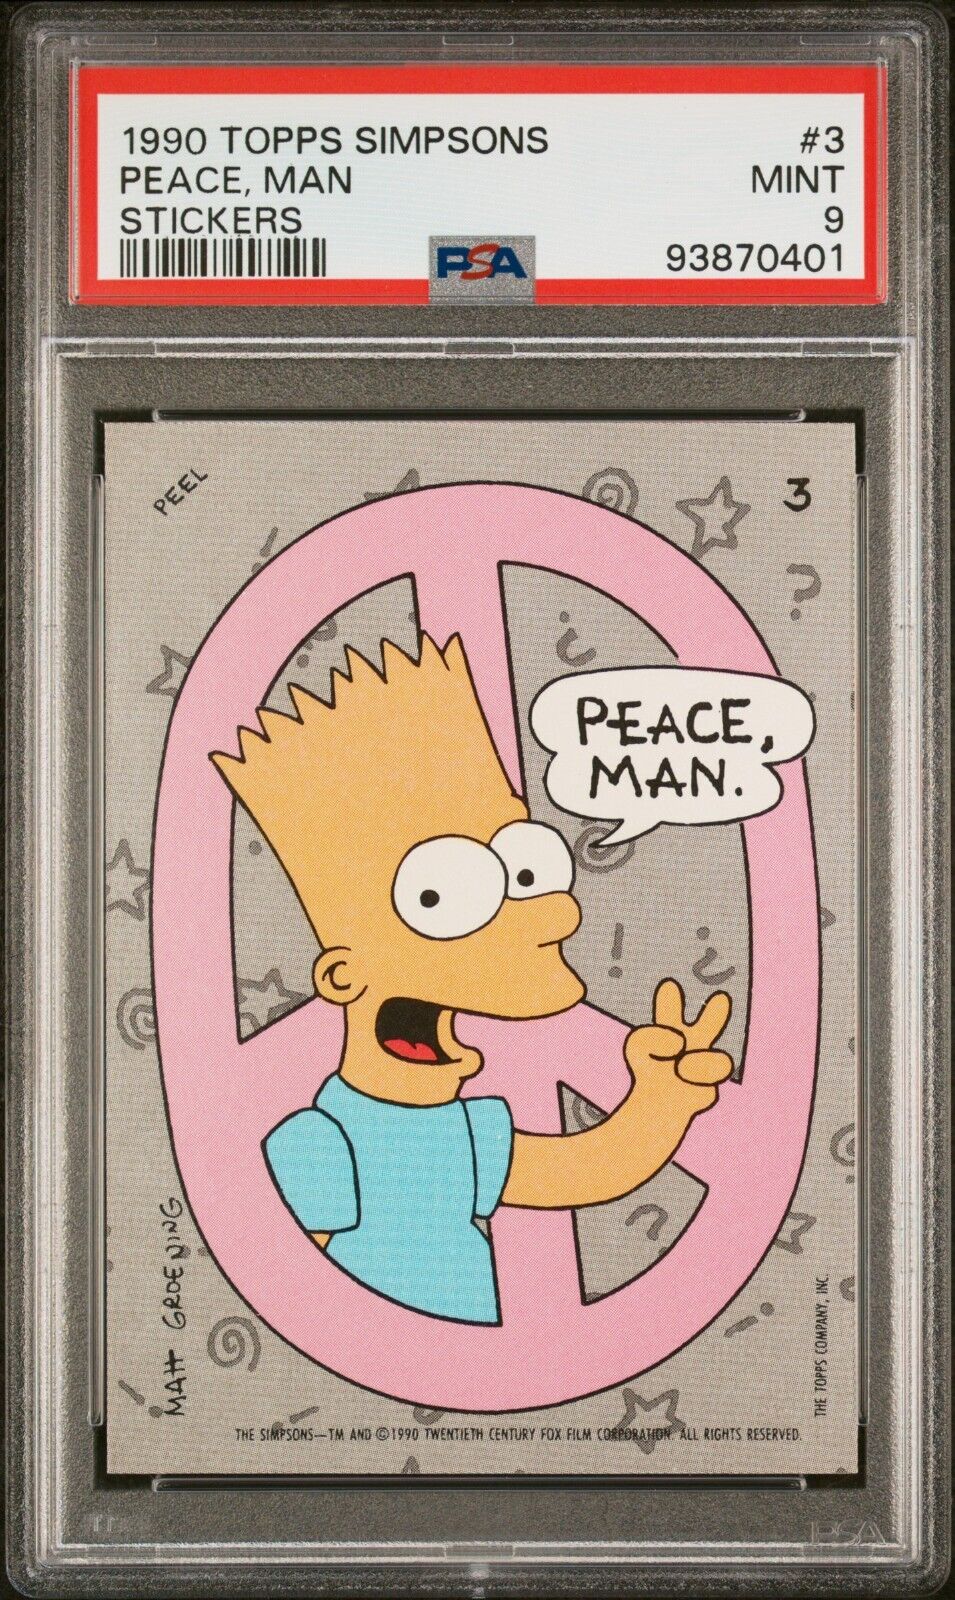 1990 Topps The Simpsons Stickers #3 Bart Simpson Peace Man  PSA 9 Mint